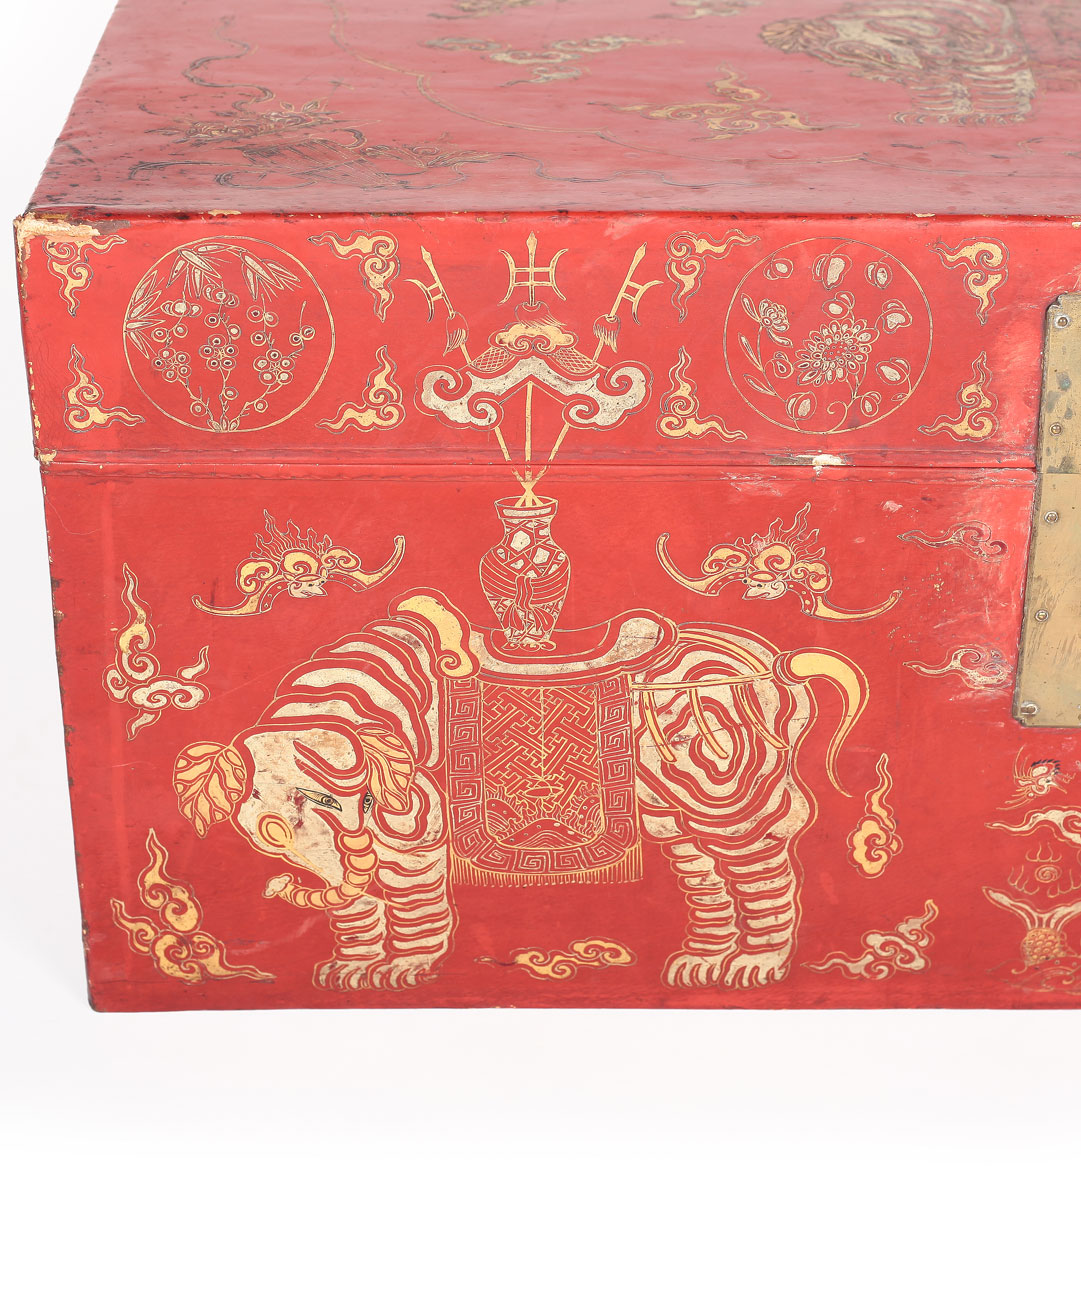 Antique Red Lacquer Trunk